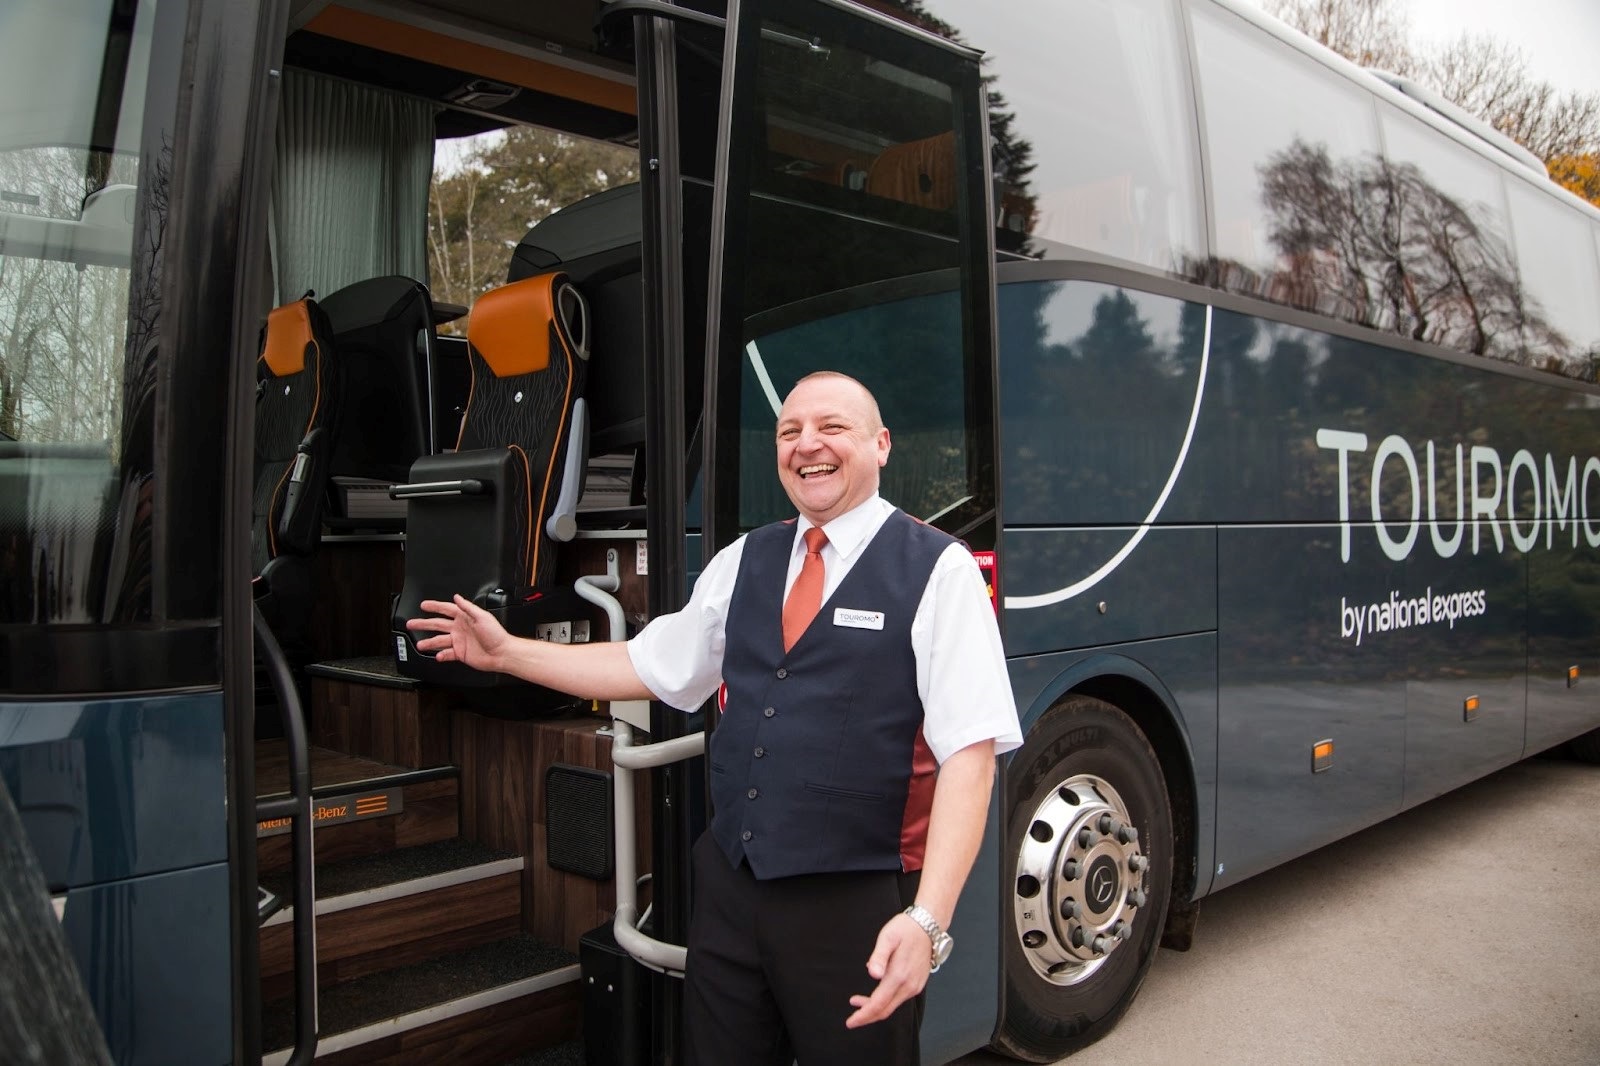 National Express launches Touromo coach holiday brand